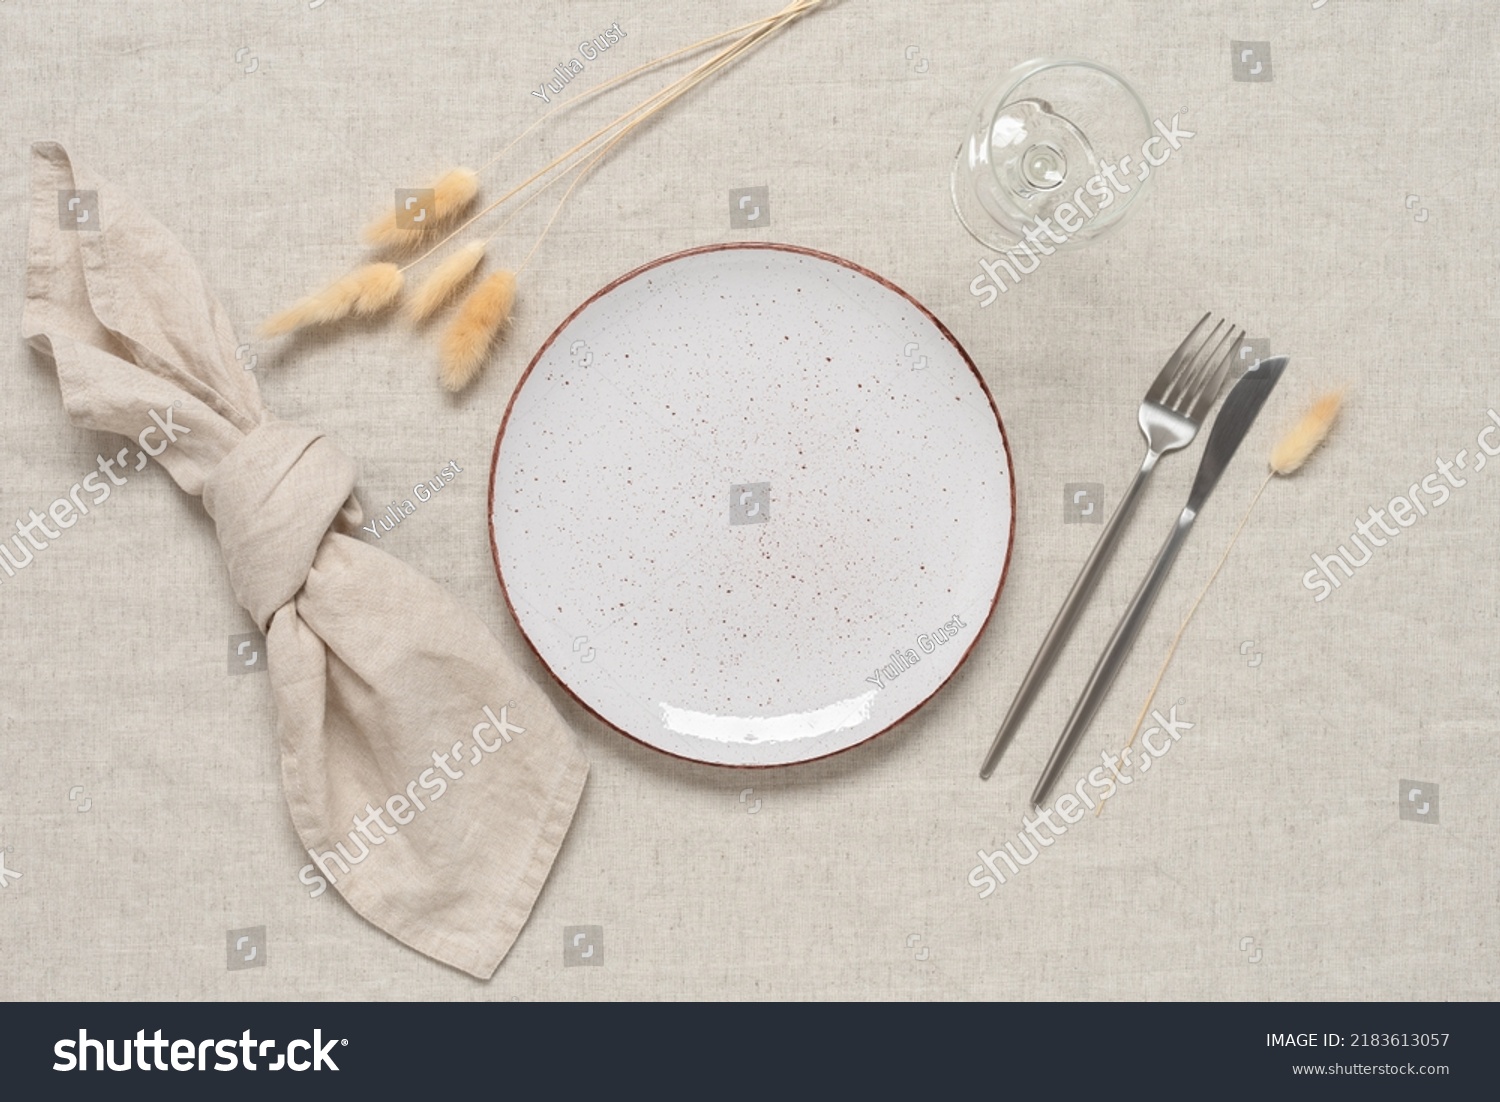 Autumn table setting. A white plate, cutlery and dry grass lagurus on a beige linen textile background. Top view, flat lay. Selective focus. #2183613057